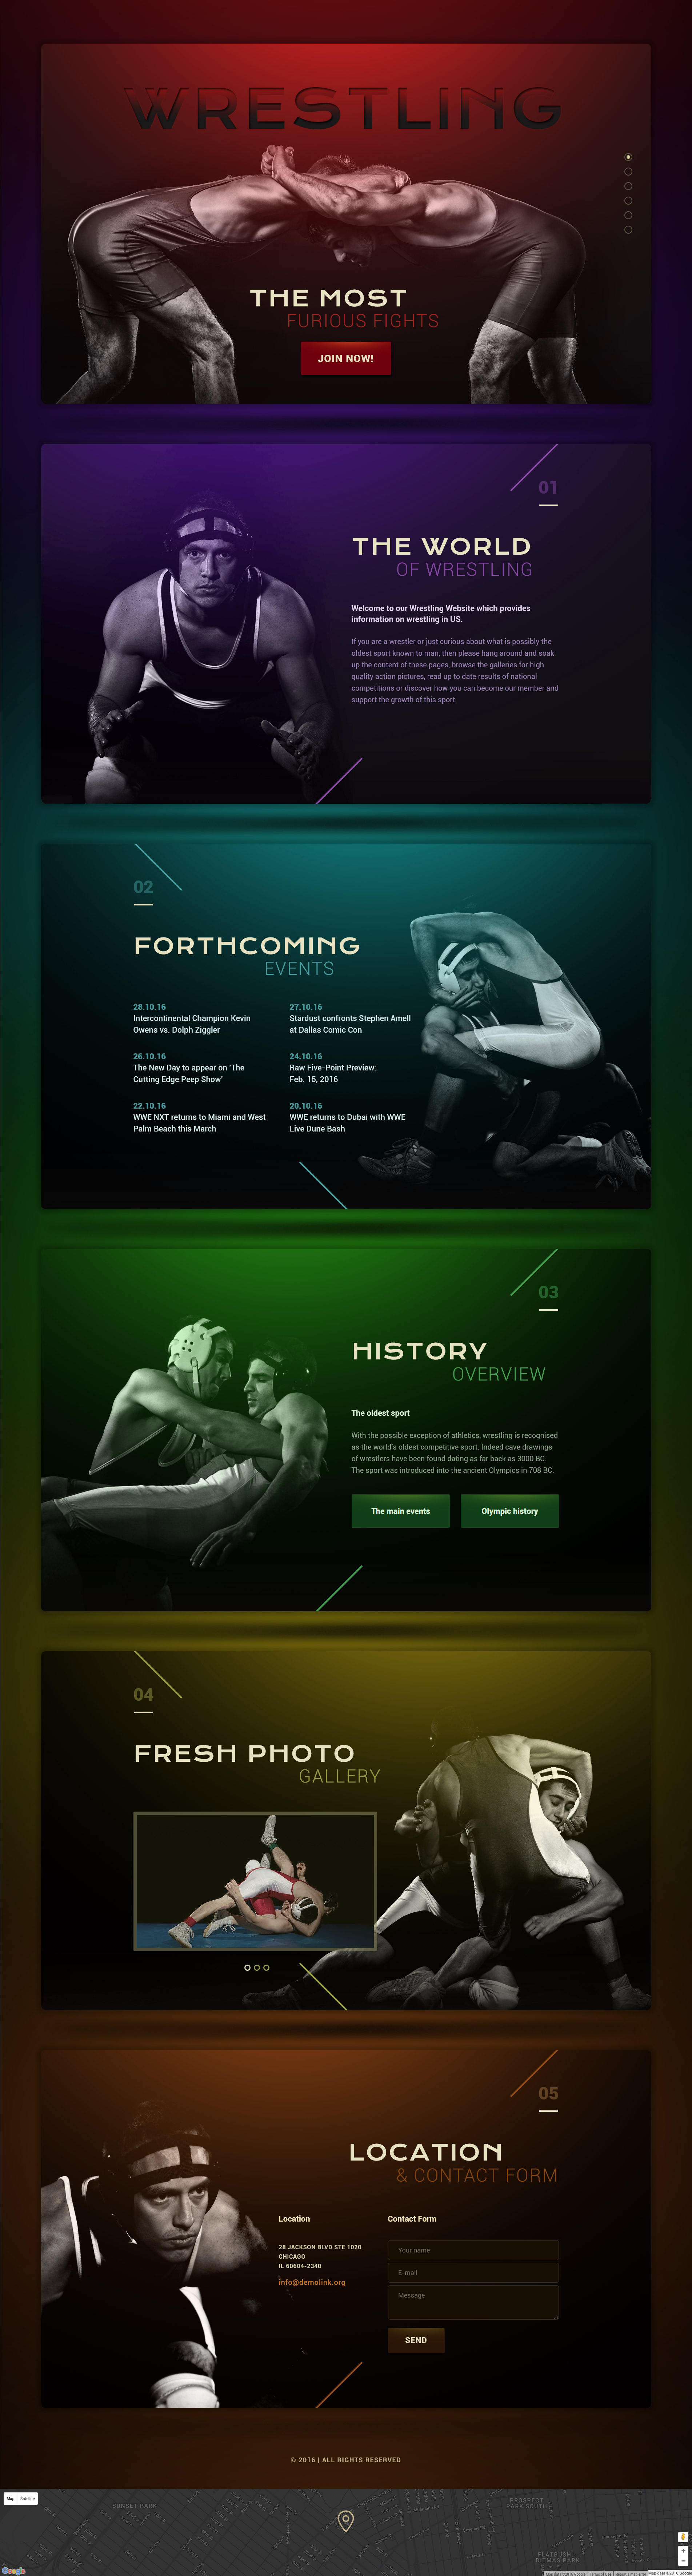 Wrestling Responsive Landing Page Template